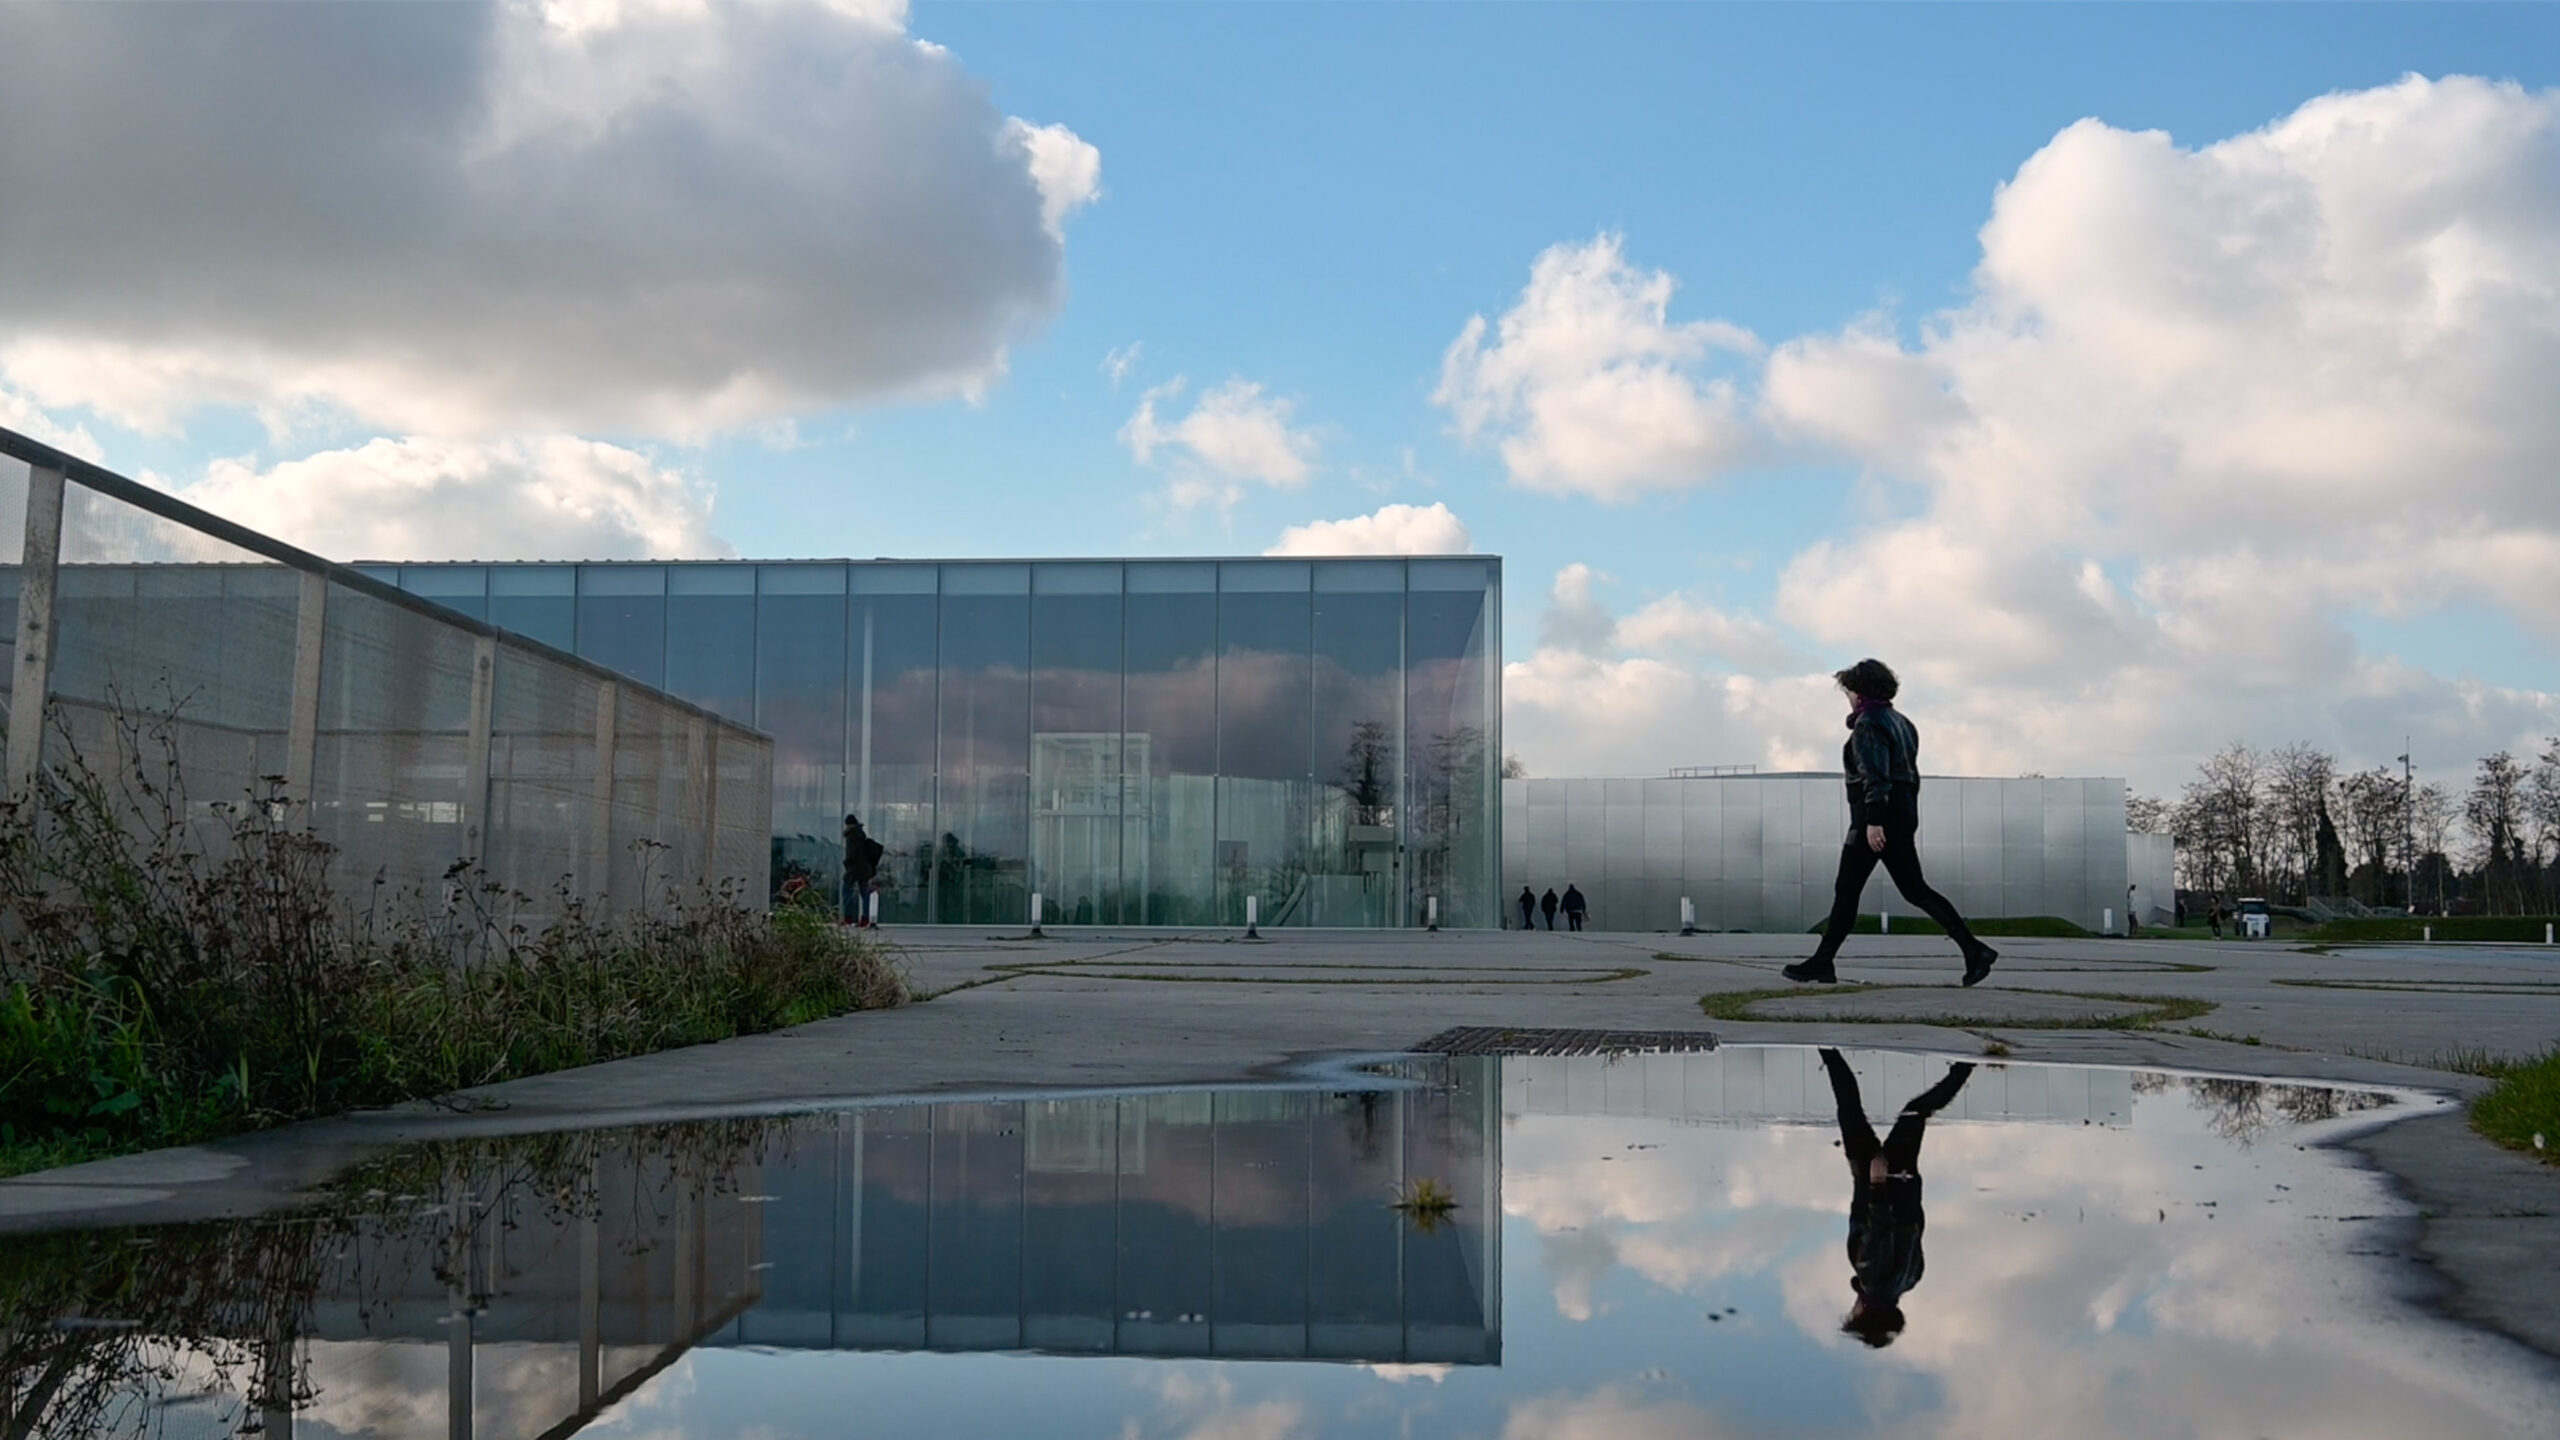 A woman crosses a courtyard, reflected in a puddle.